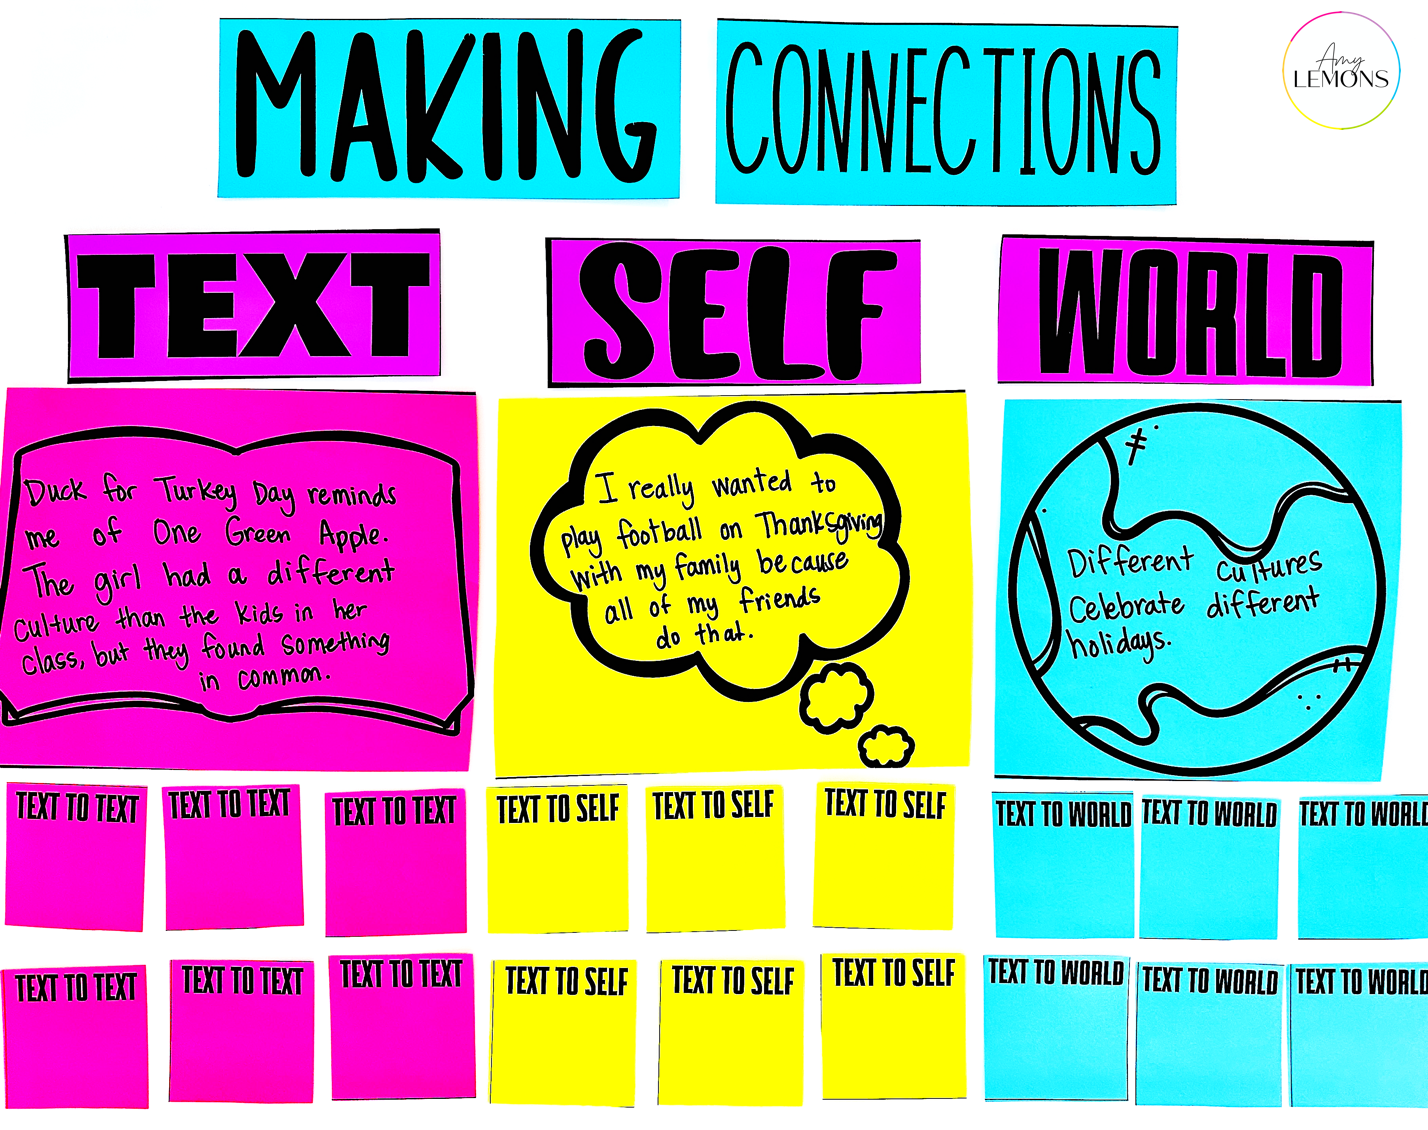 An anchor chart for teachers to teach making connections to students with a pink section for text to text, yellow for text to self, and blue for text to world connections.